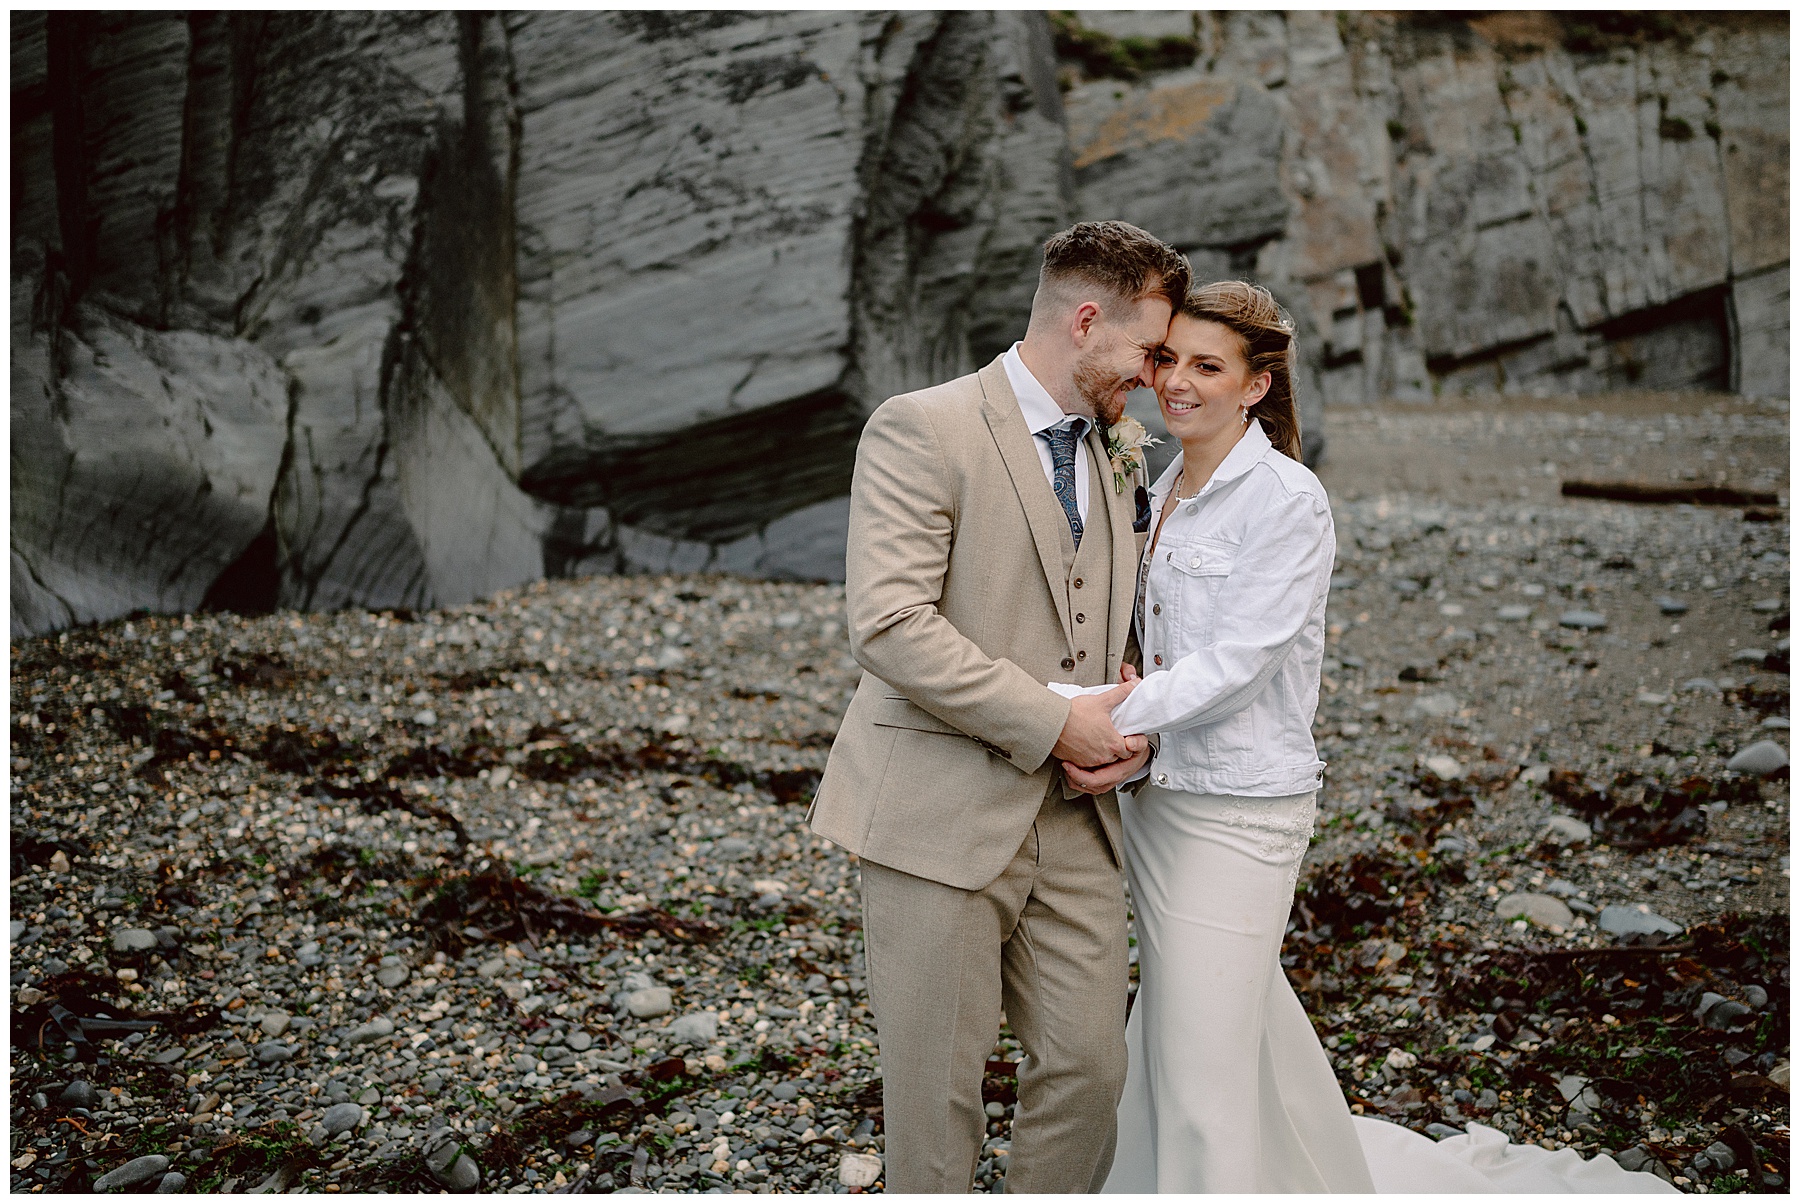 Bride & Groom Photos at The Cliff Hotel